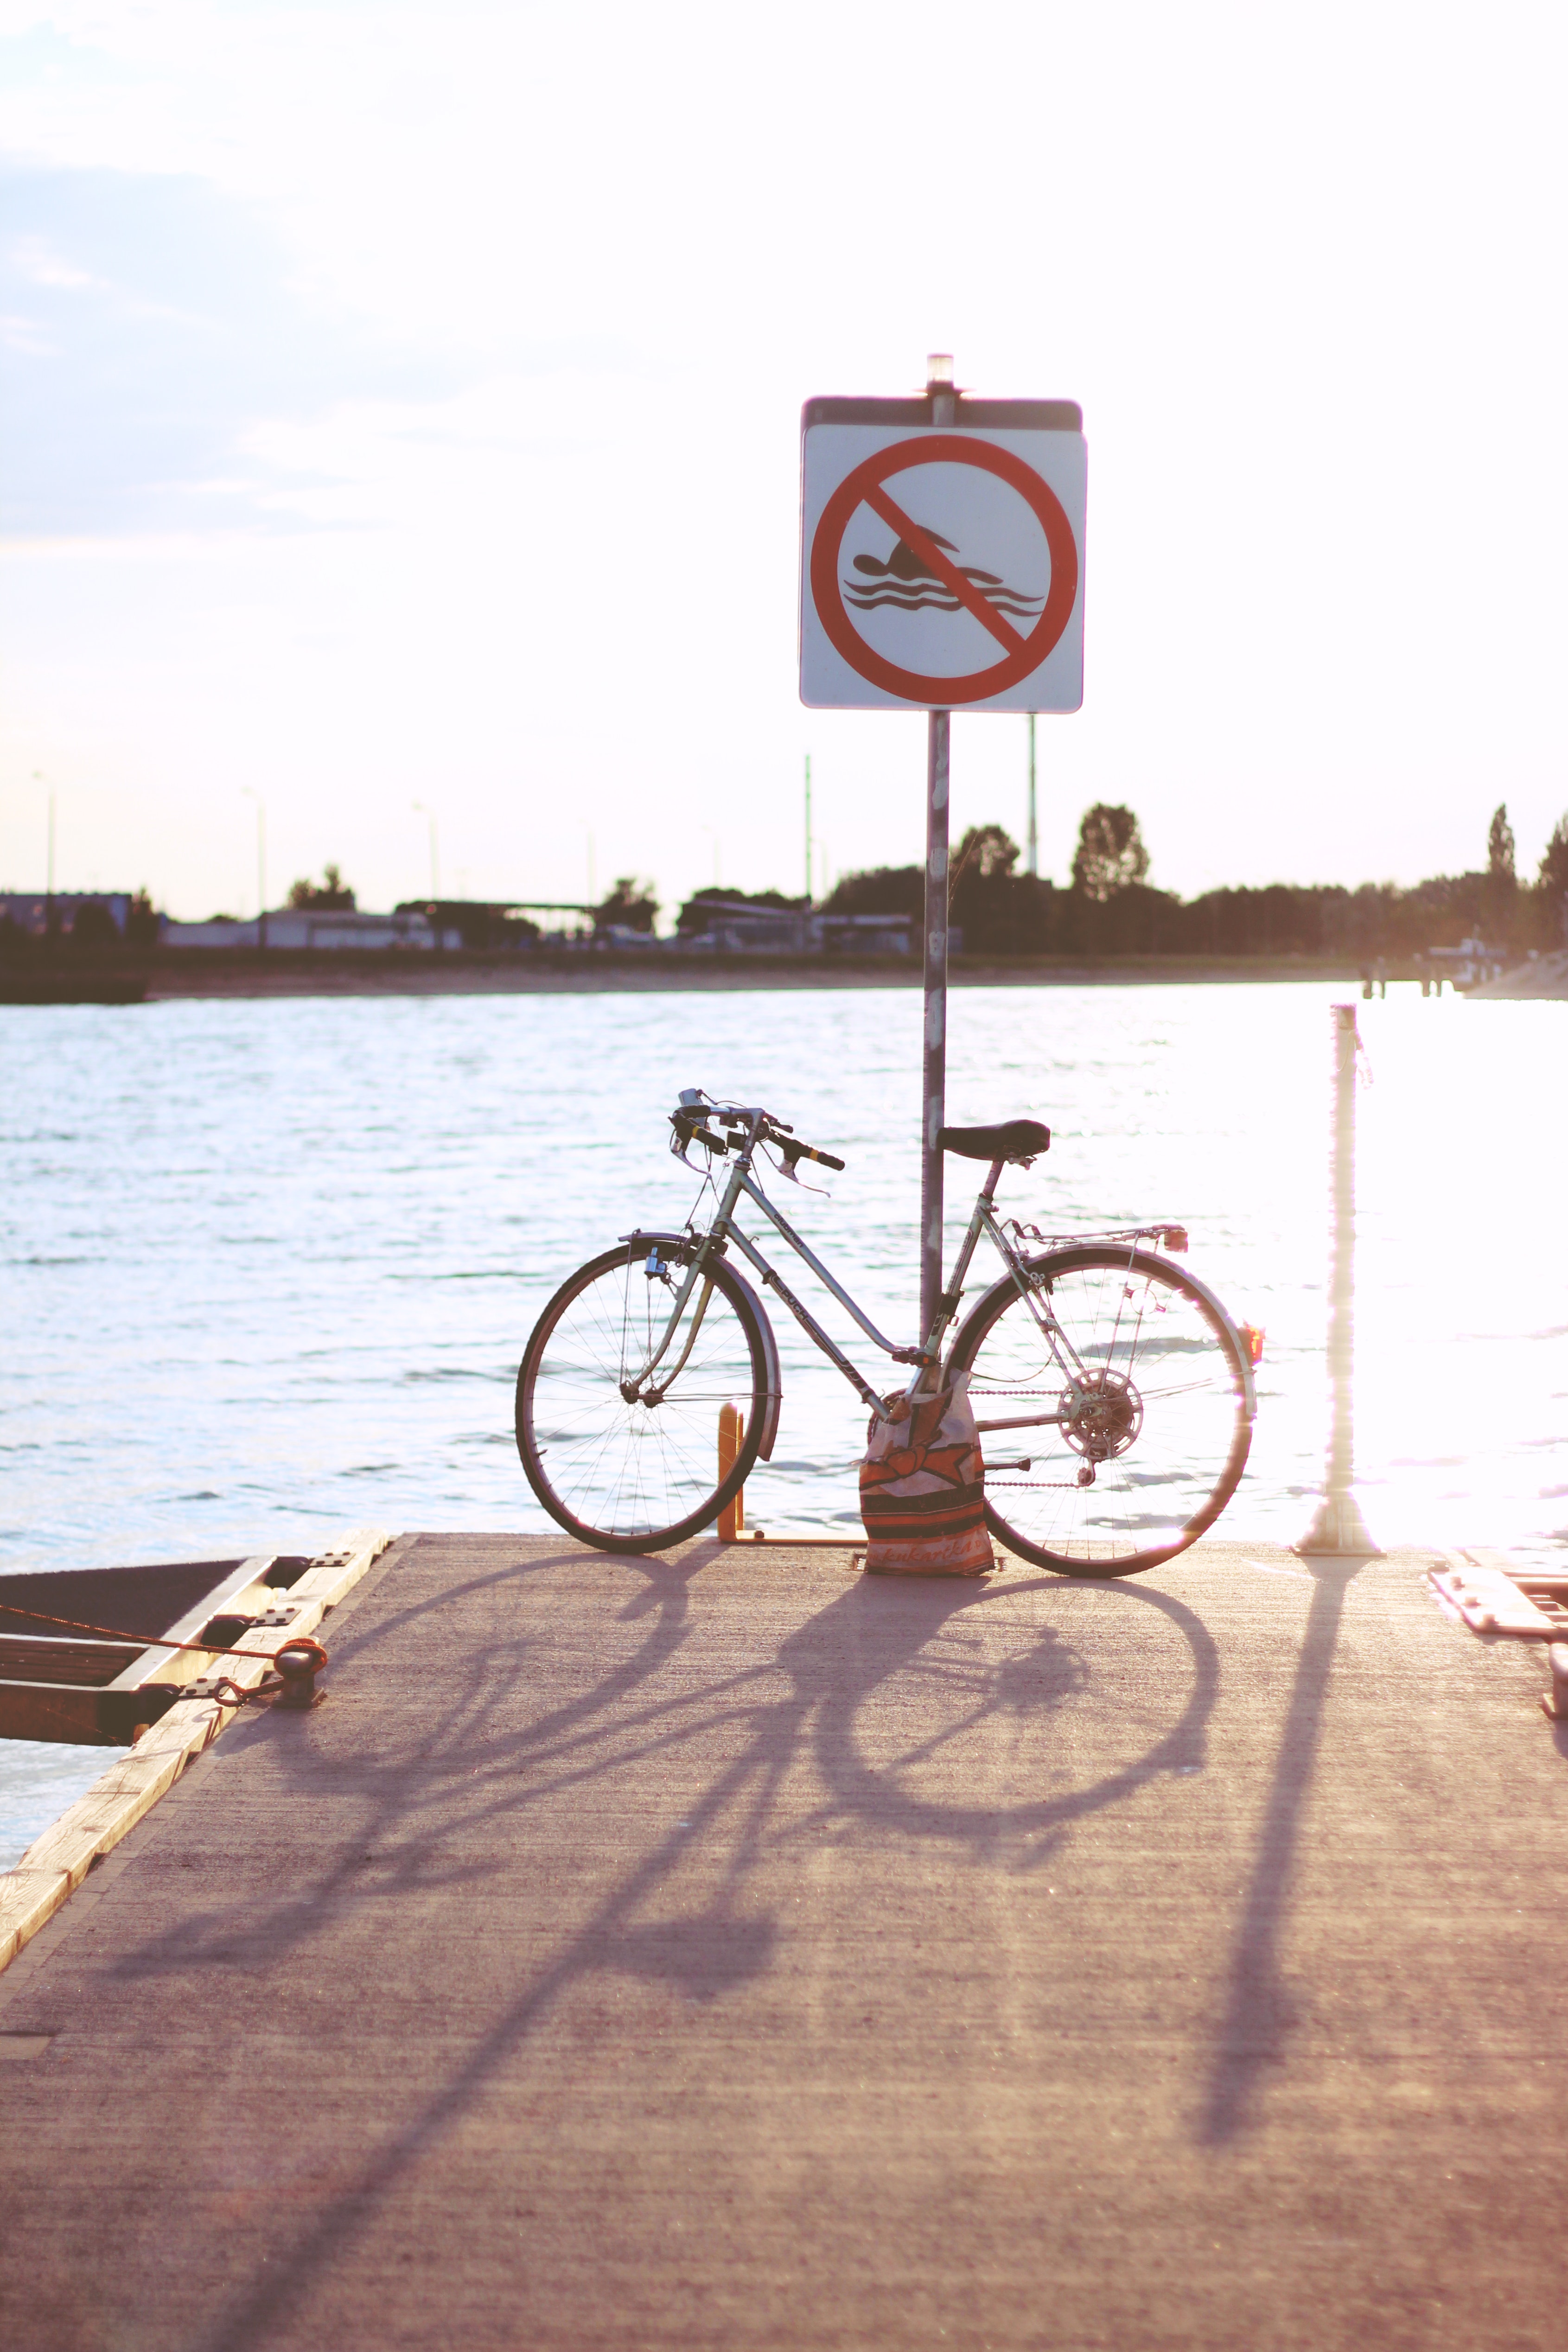 Sunset & bicycle, Beach, Road, Water, Vehicle, HQ Photo